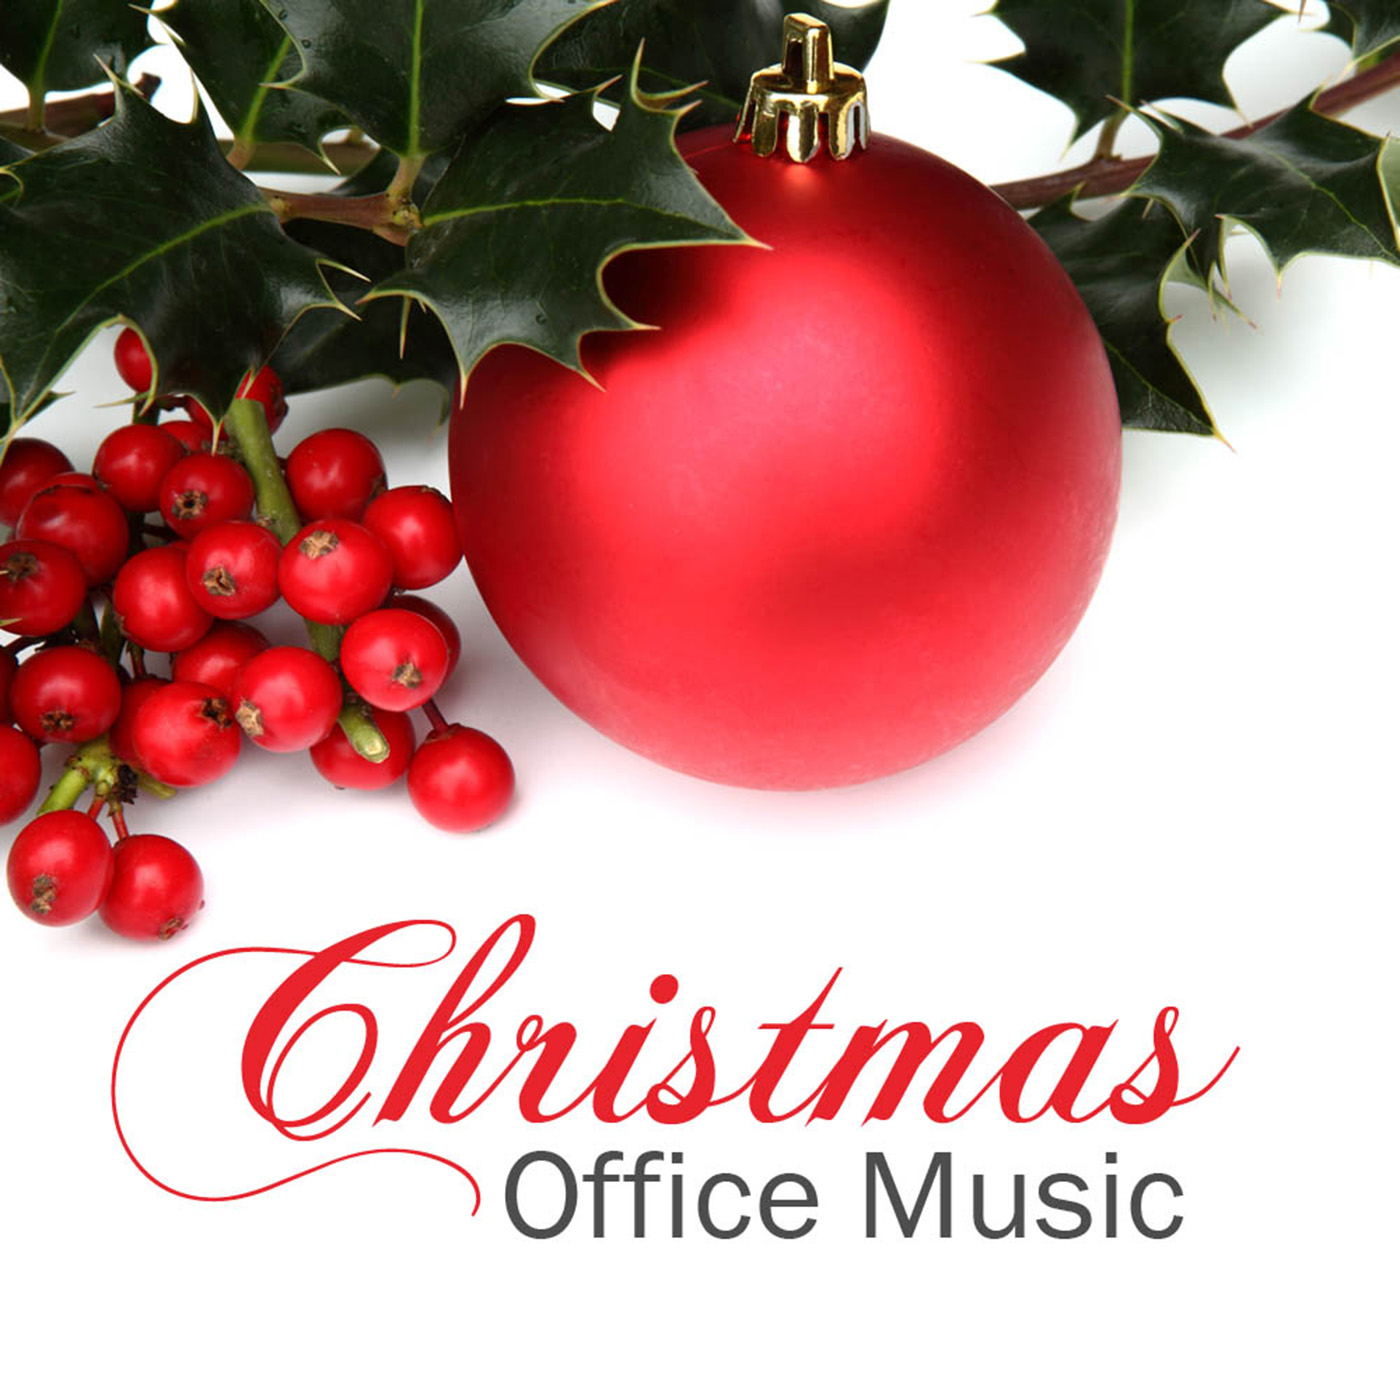 Christmas Office Music Background: Holiday Music for Create a Good Team Spirit in your Office during Christmas Time, Christmas Songs Background Music Hits